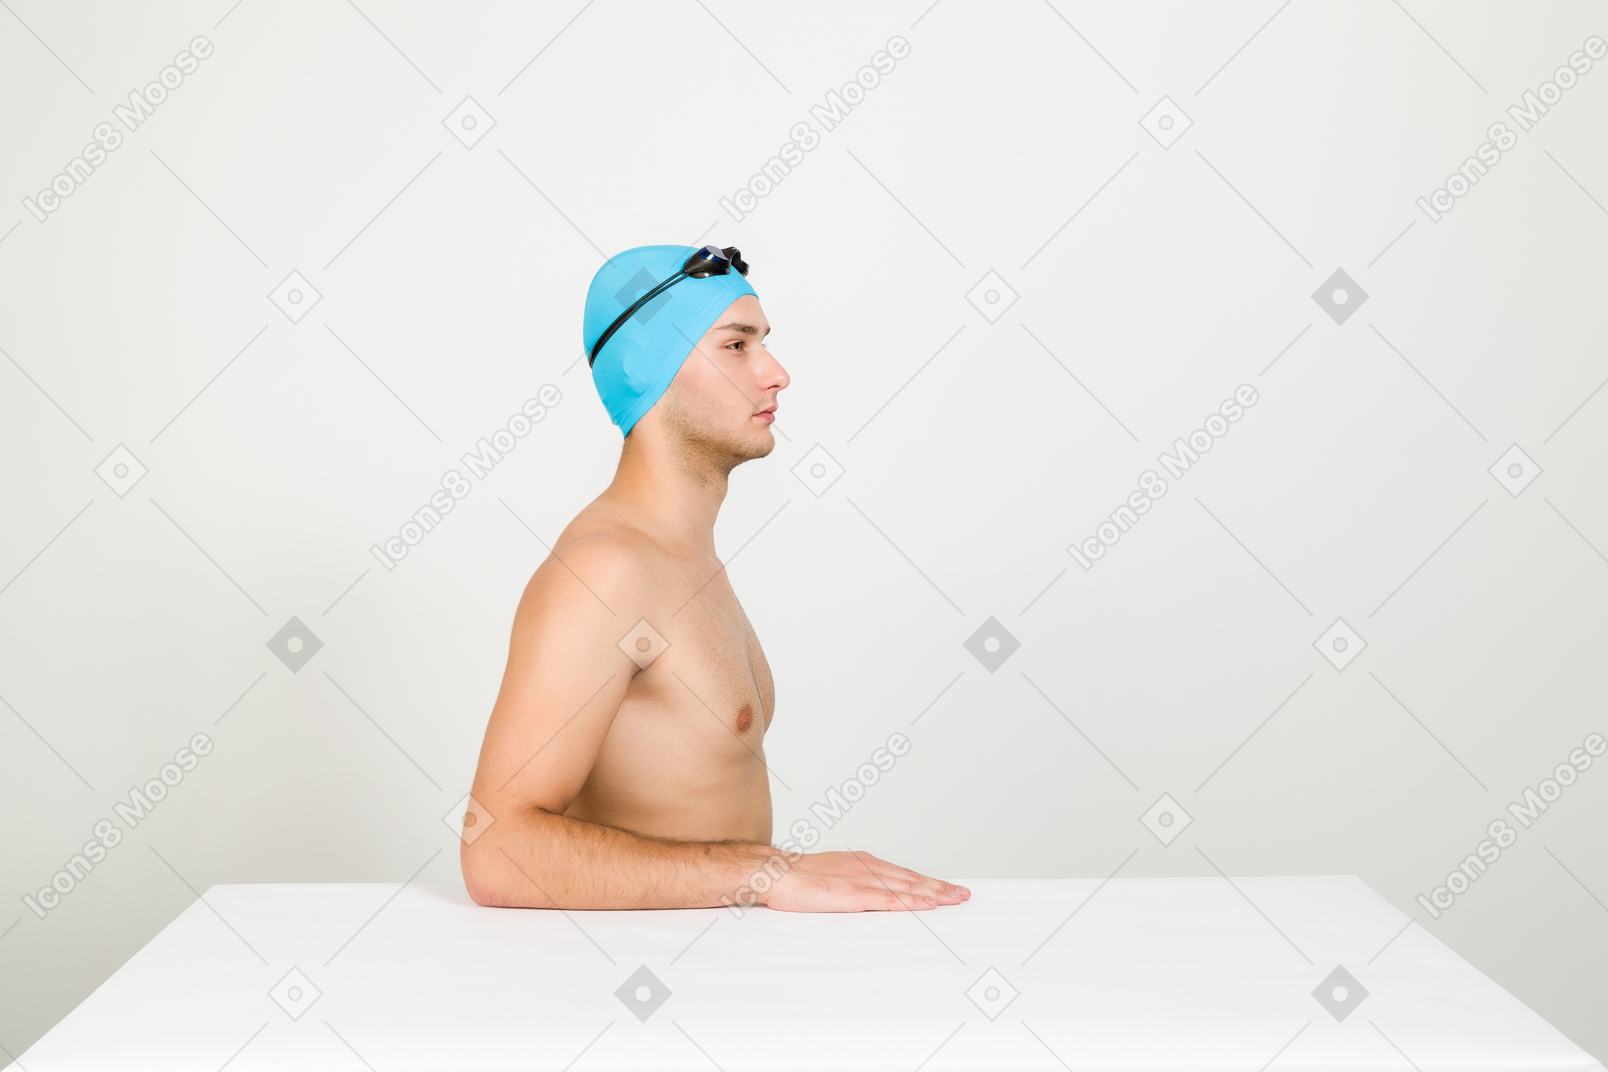 Bare chested swimmer sitting sideways